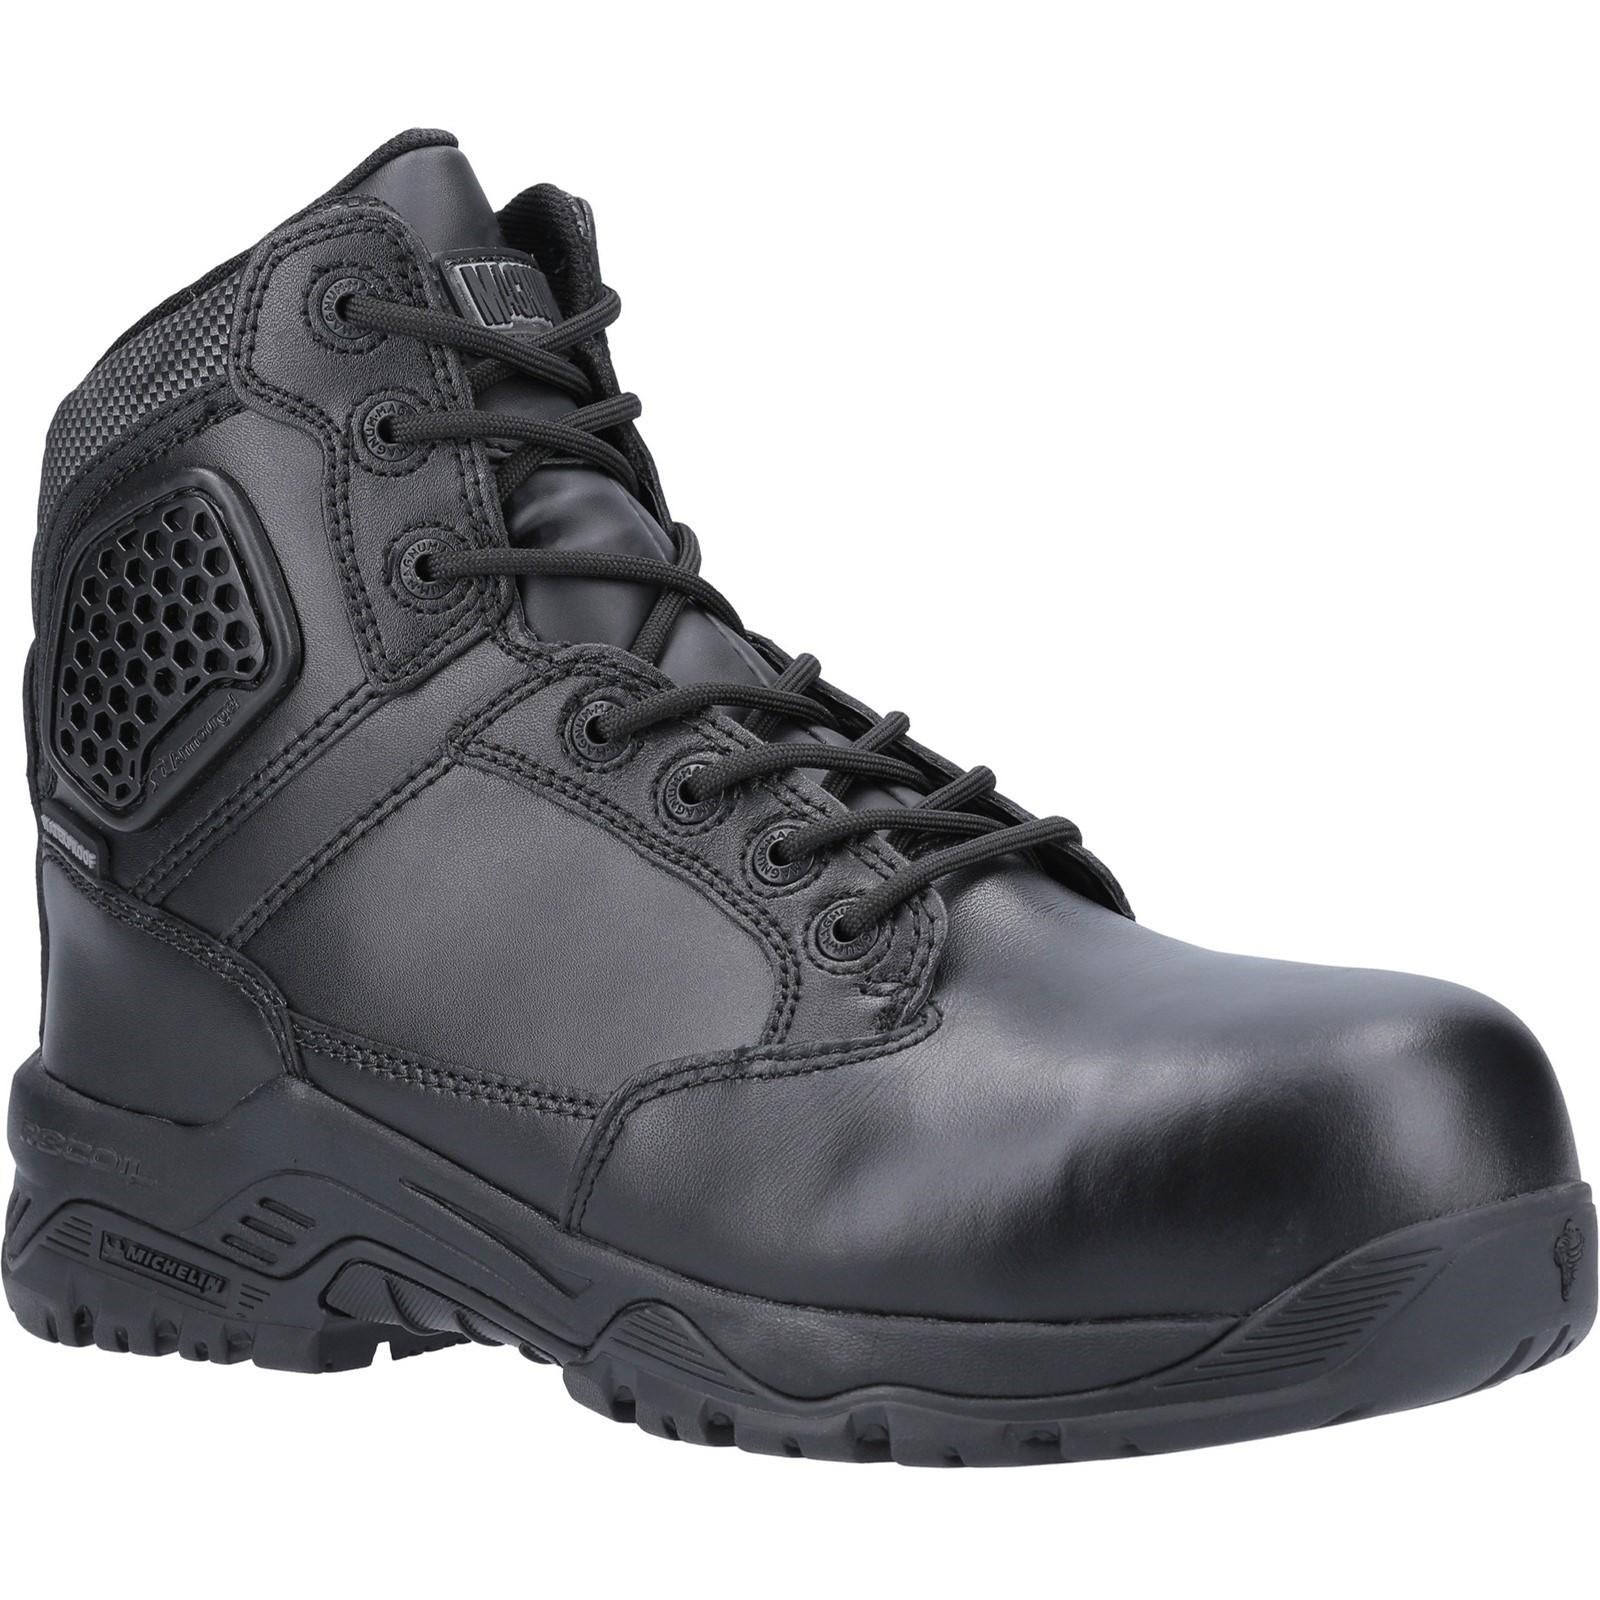 Magnum Strike Force 6.0 Side-Zip CT CP WP Uniform Safety Boot